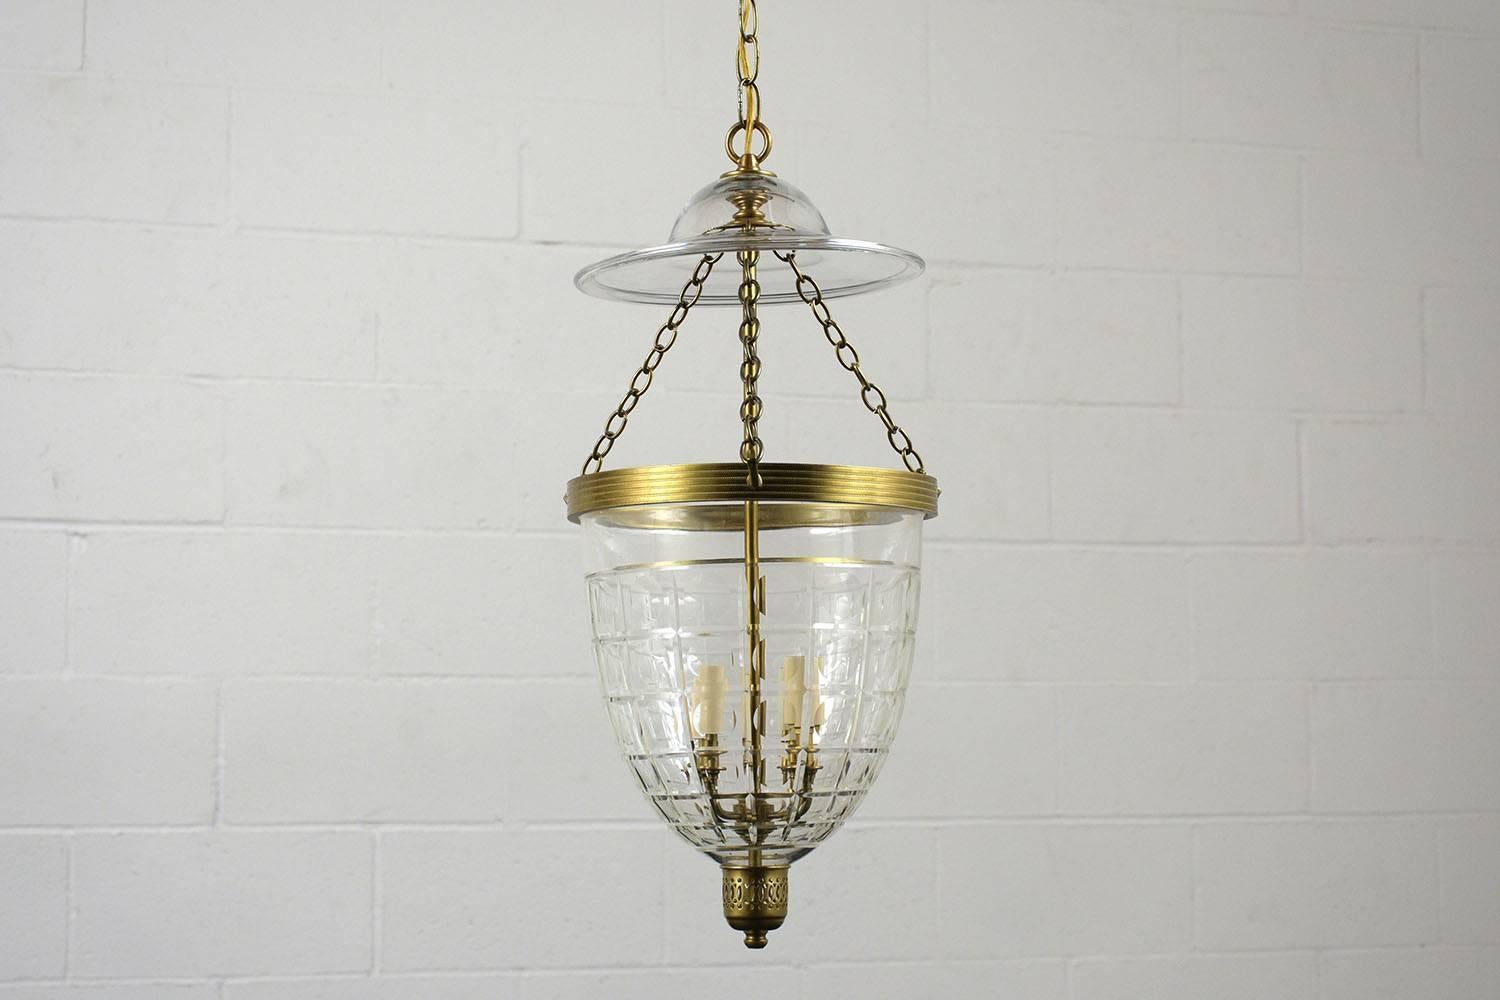 This 1980s Regency-style pendant lantern has a cut glass shade with a square design and brass accents along the top and bottom. Inside the shade are four lights with faux candle covers. The chain is 12 inches long with a glass top shade. This